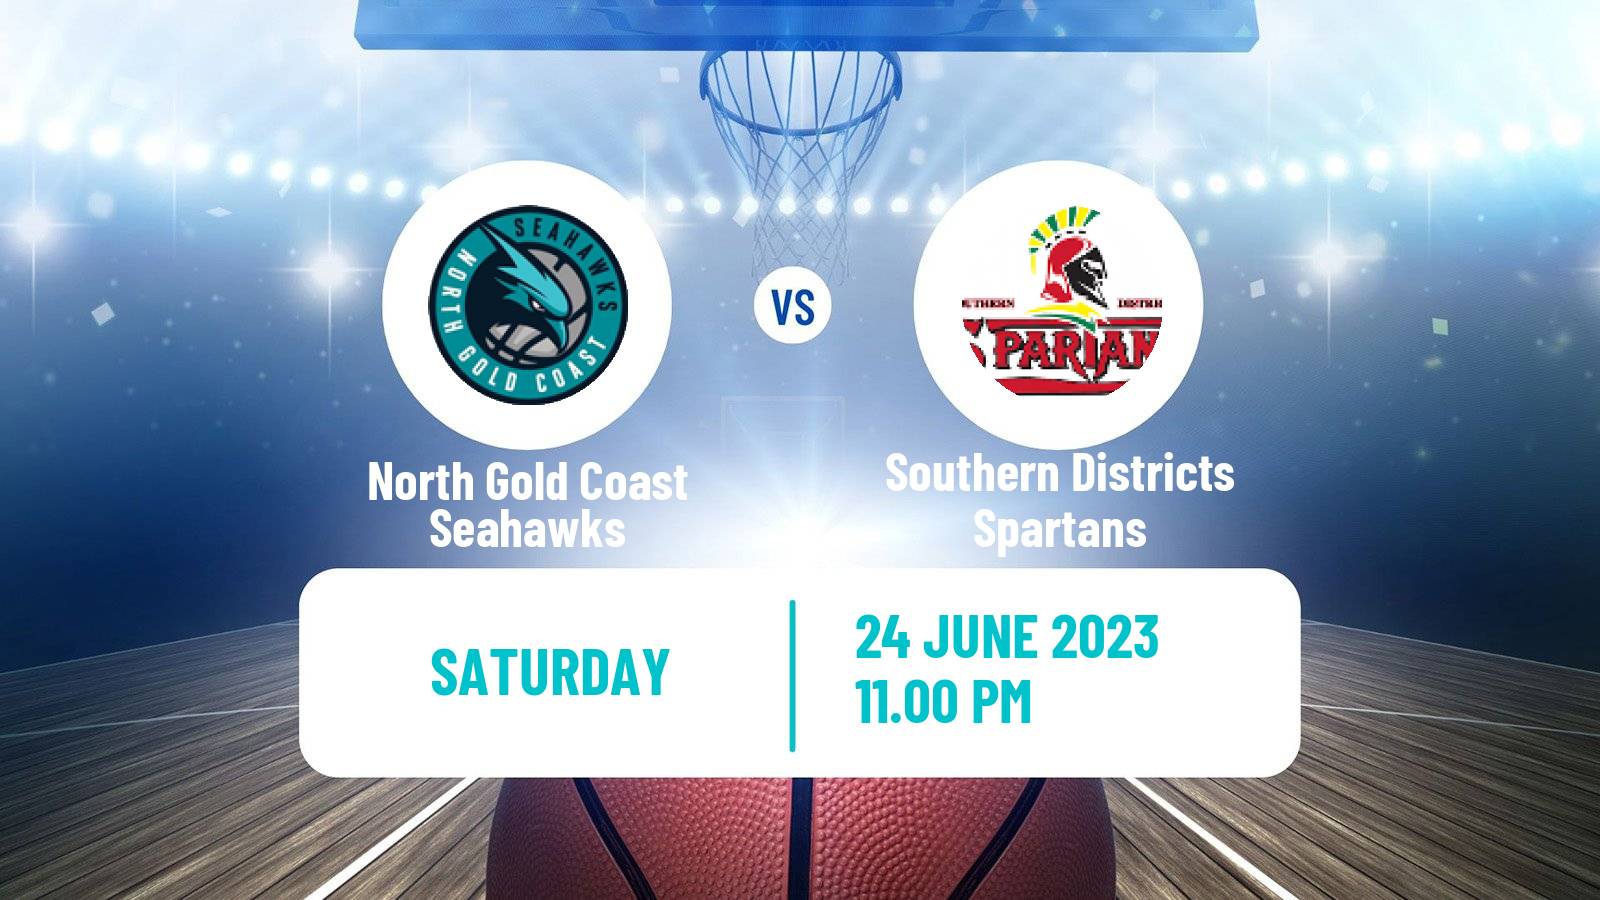 Basketball Australian NBL1 North Women North Gold Coast Seahawks - Southern Districts Spartans